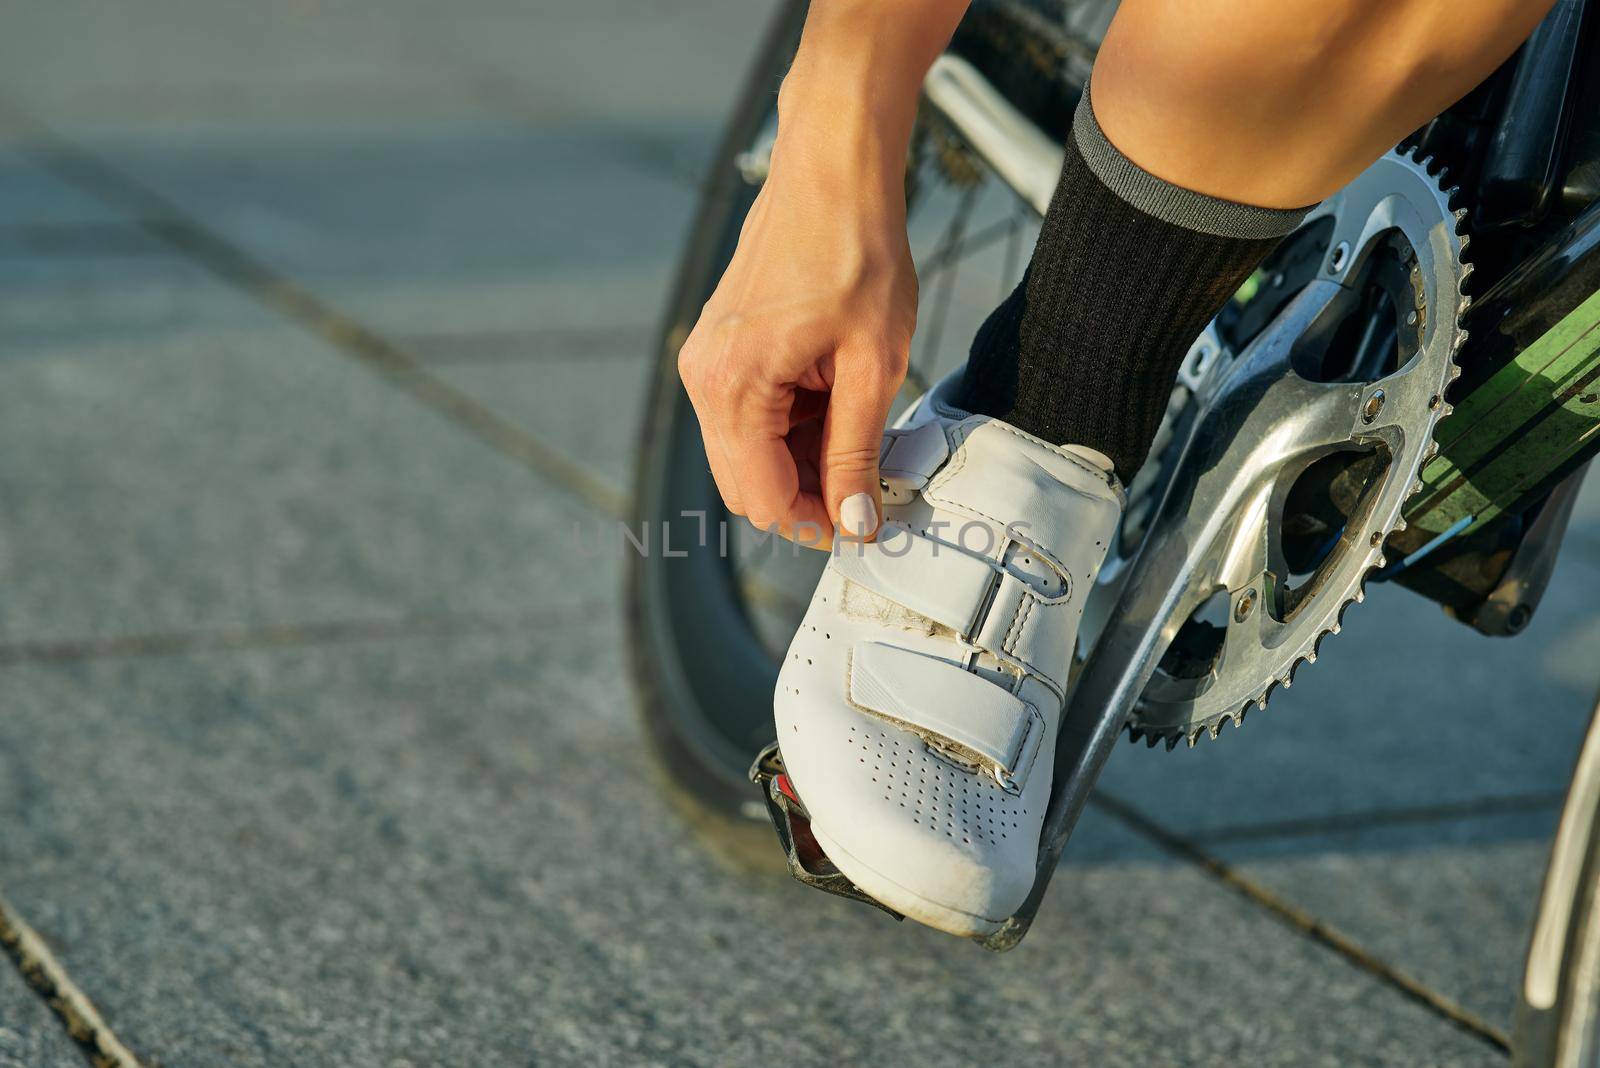 Close up shot of female cyclist wearing, fastening cycling shoes while riding bike, training outdoors on a warm day. Active lifestyle, sports concept